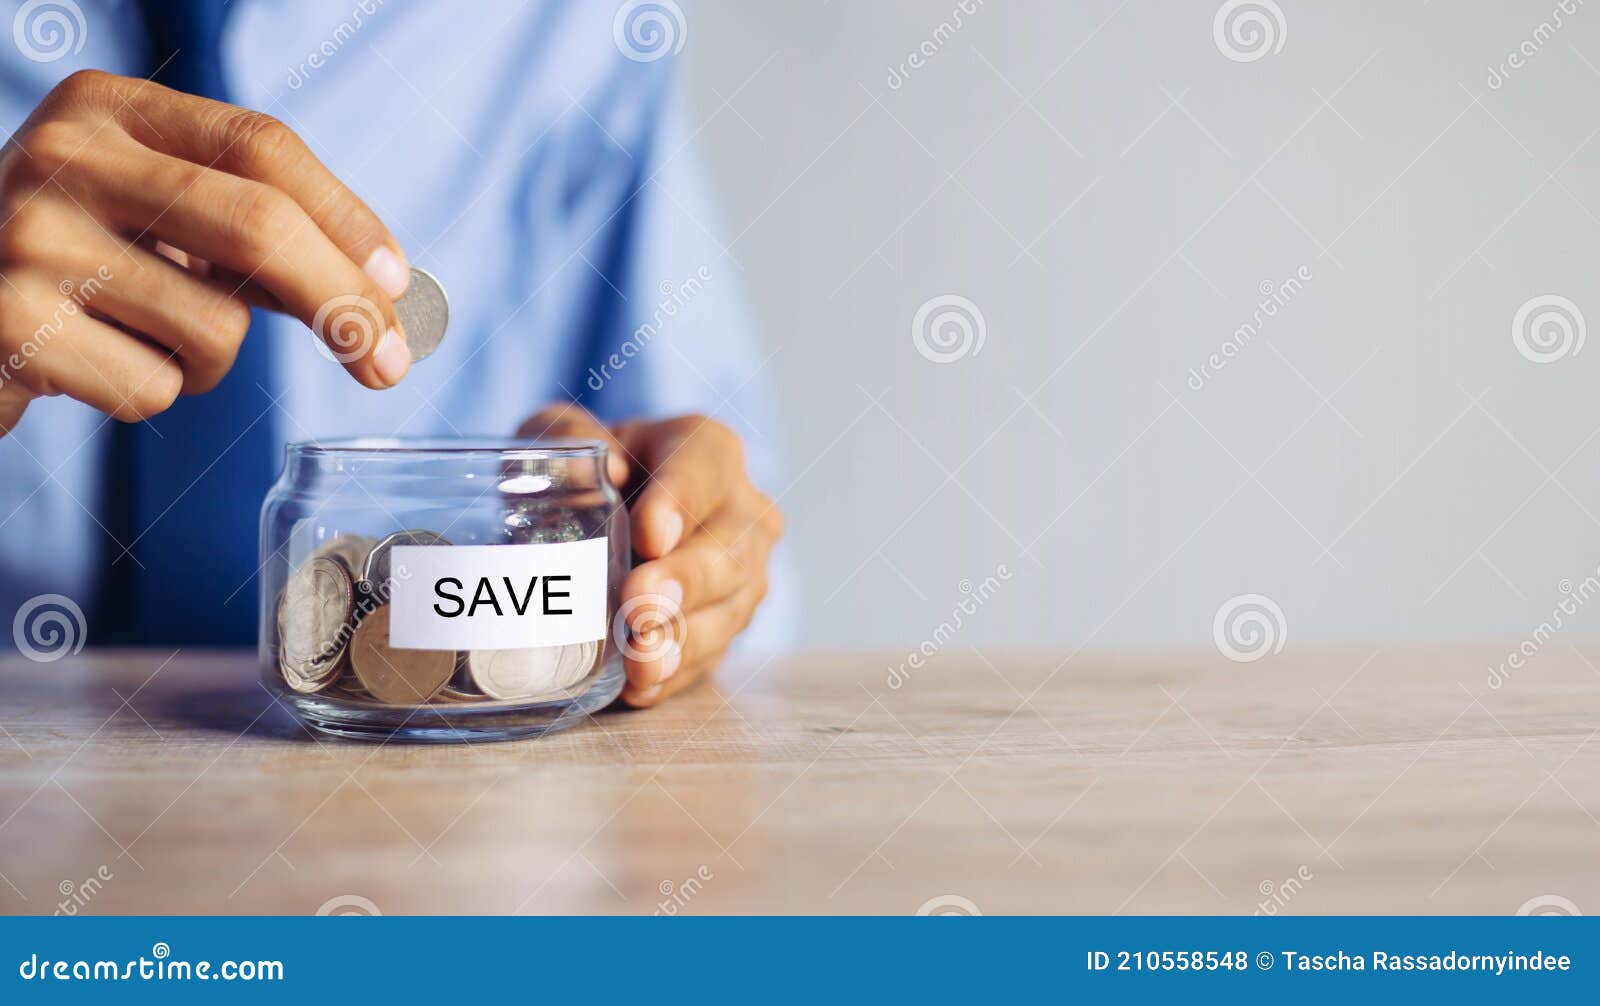 saving money concept preset by male hand putting money coin